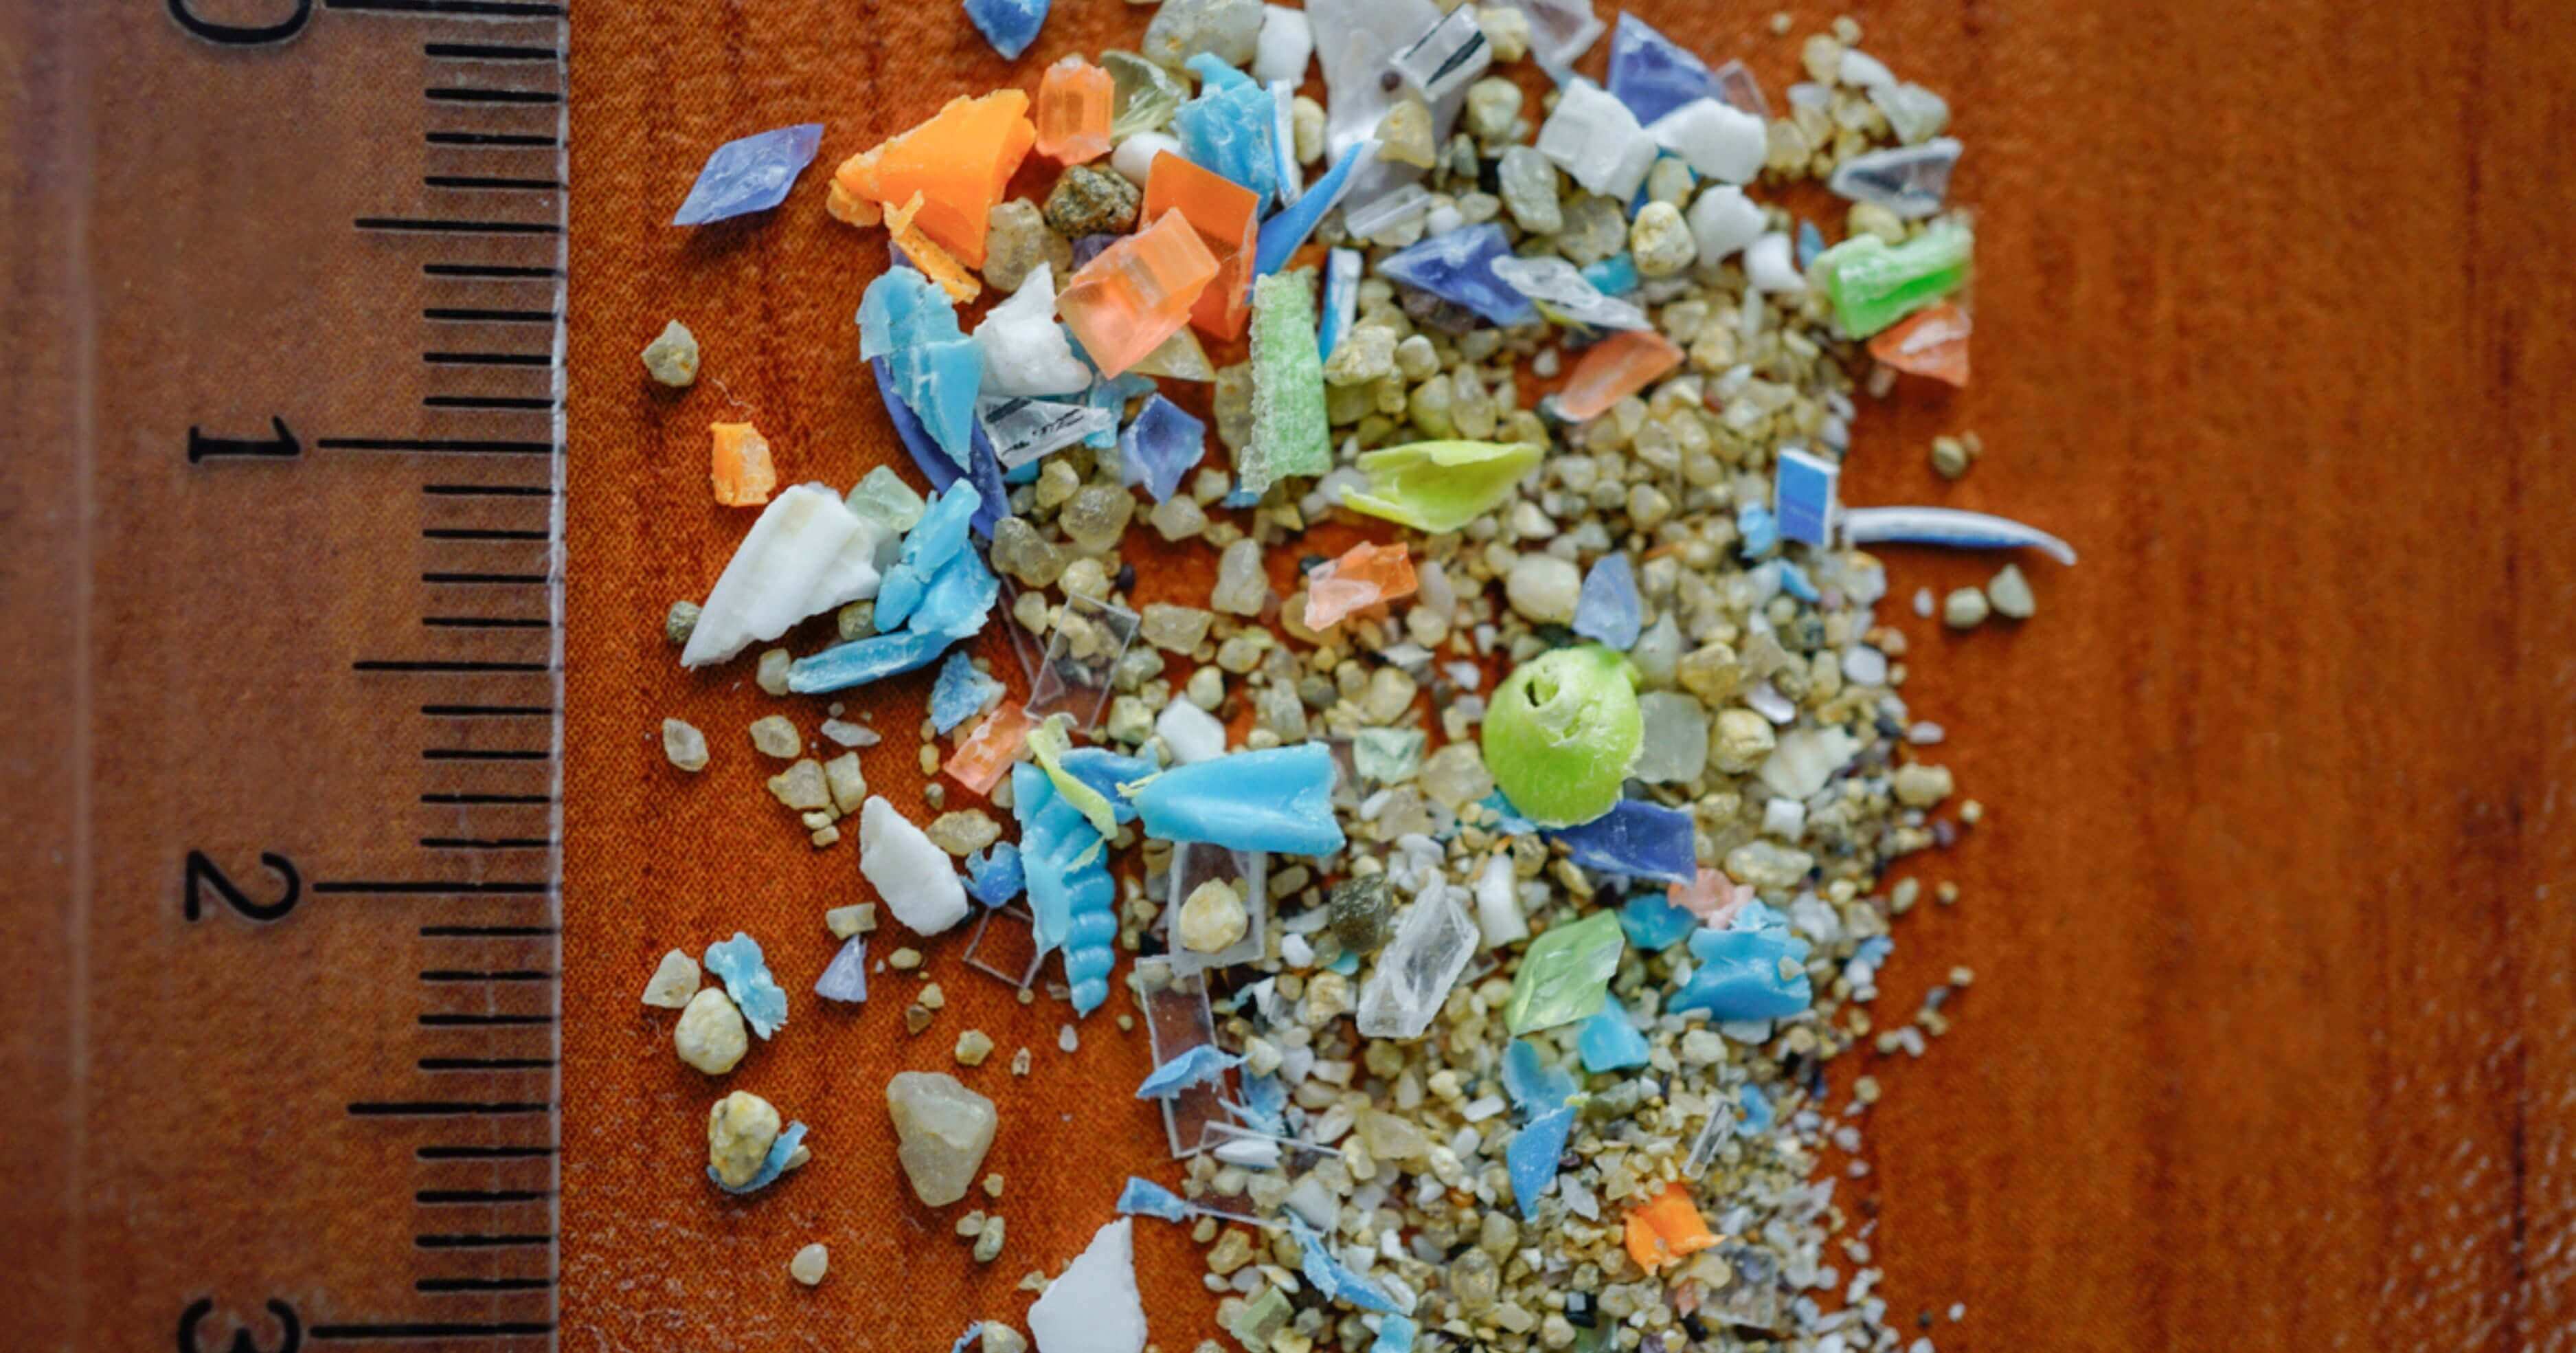 Lots of microplastics scattered on a table next to a ruler measuring them 